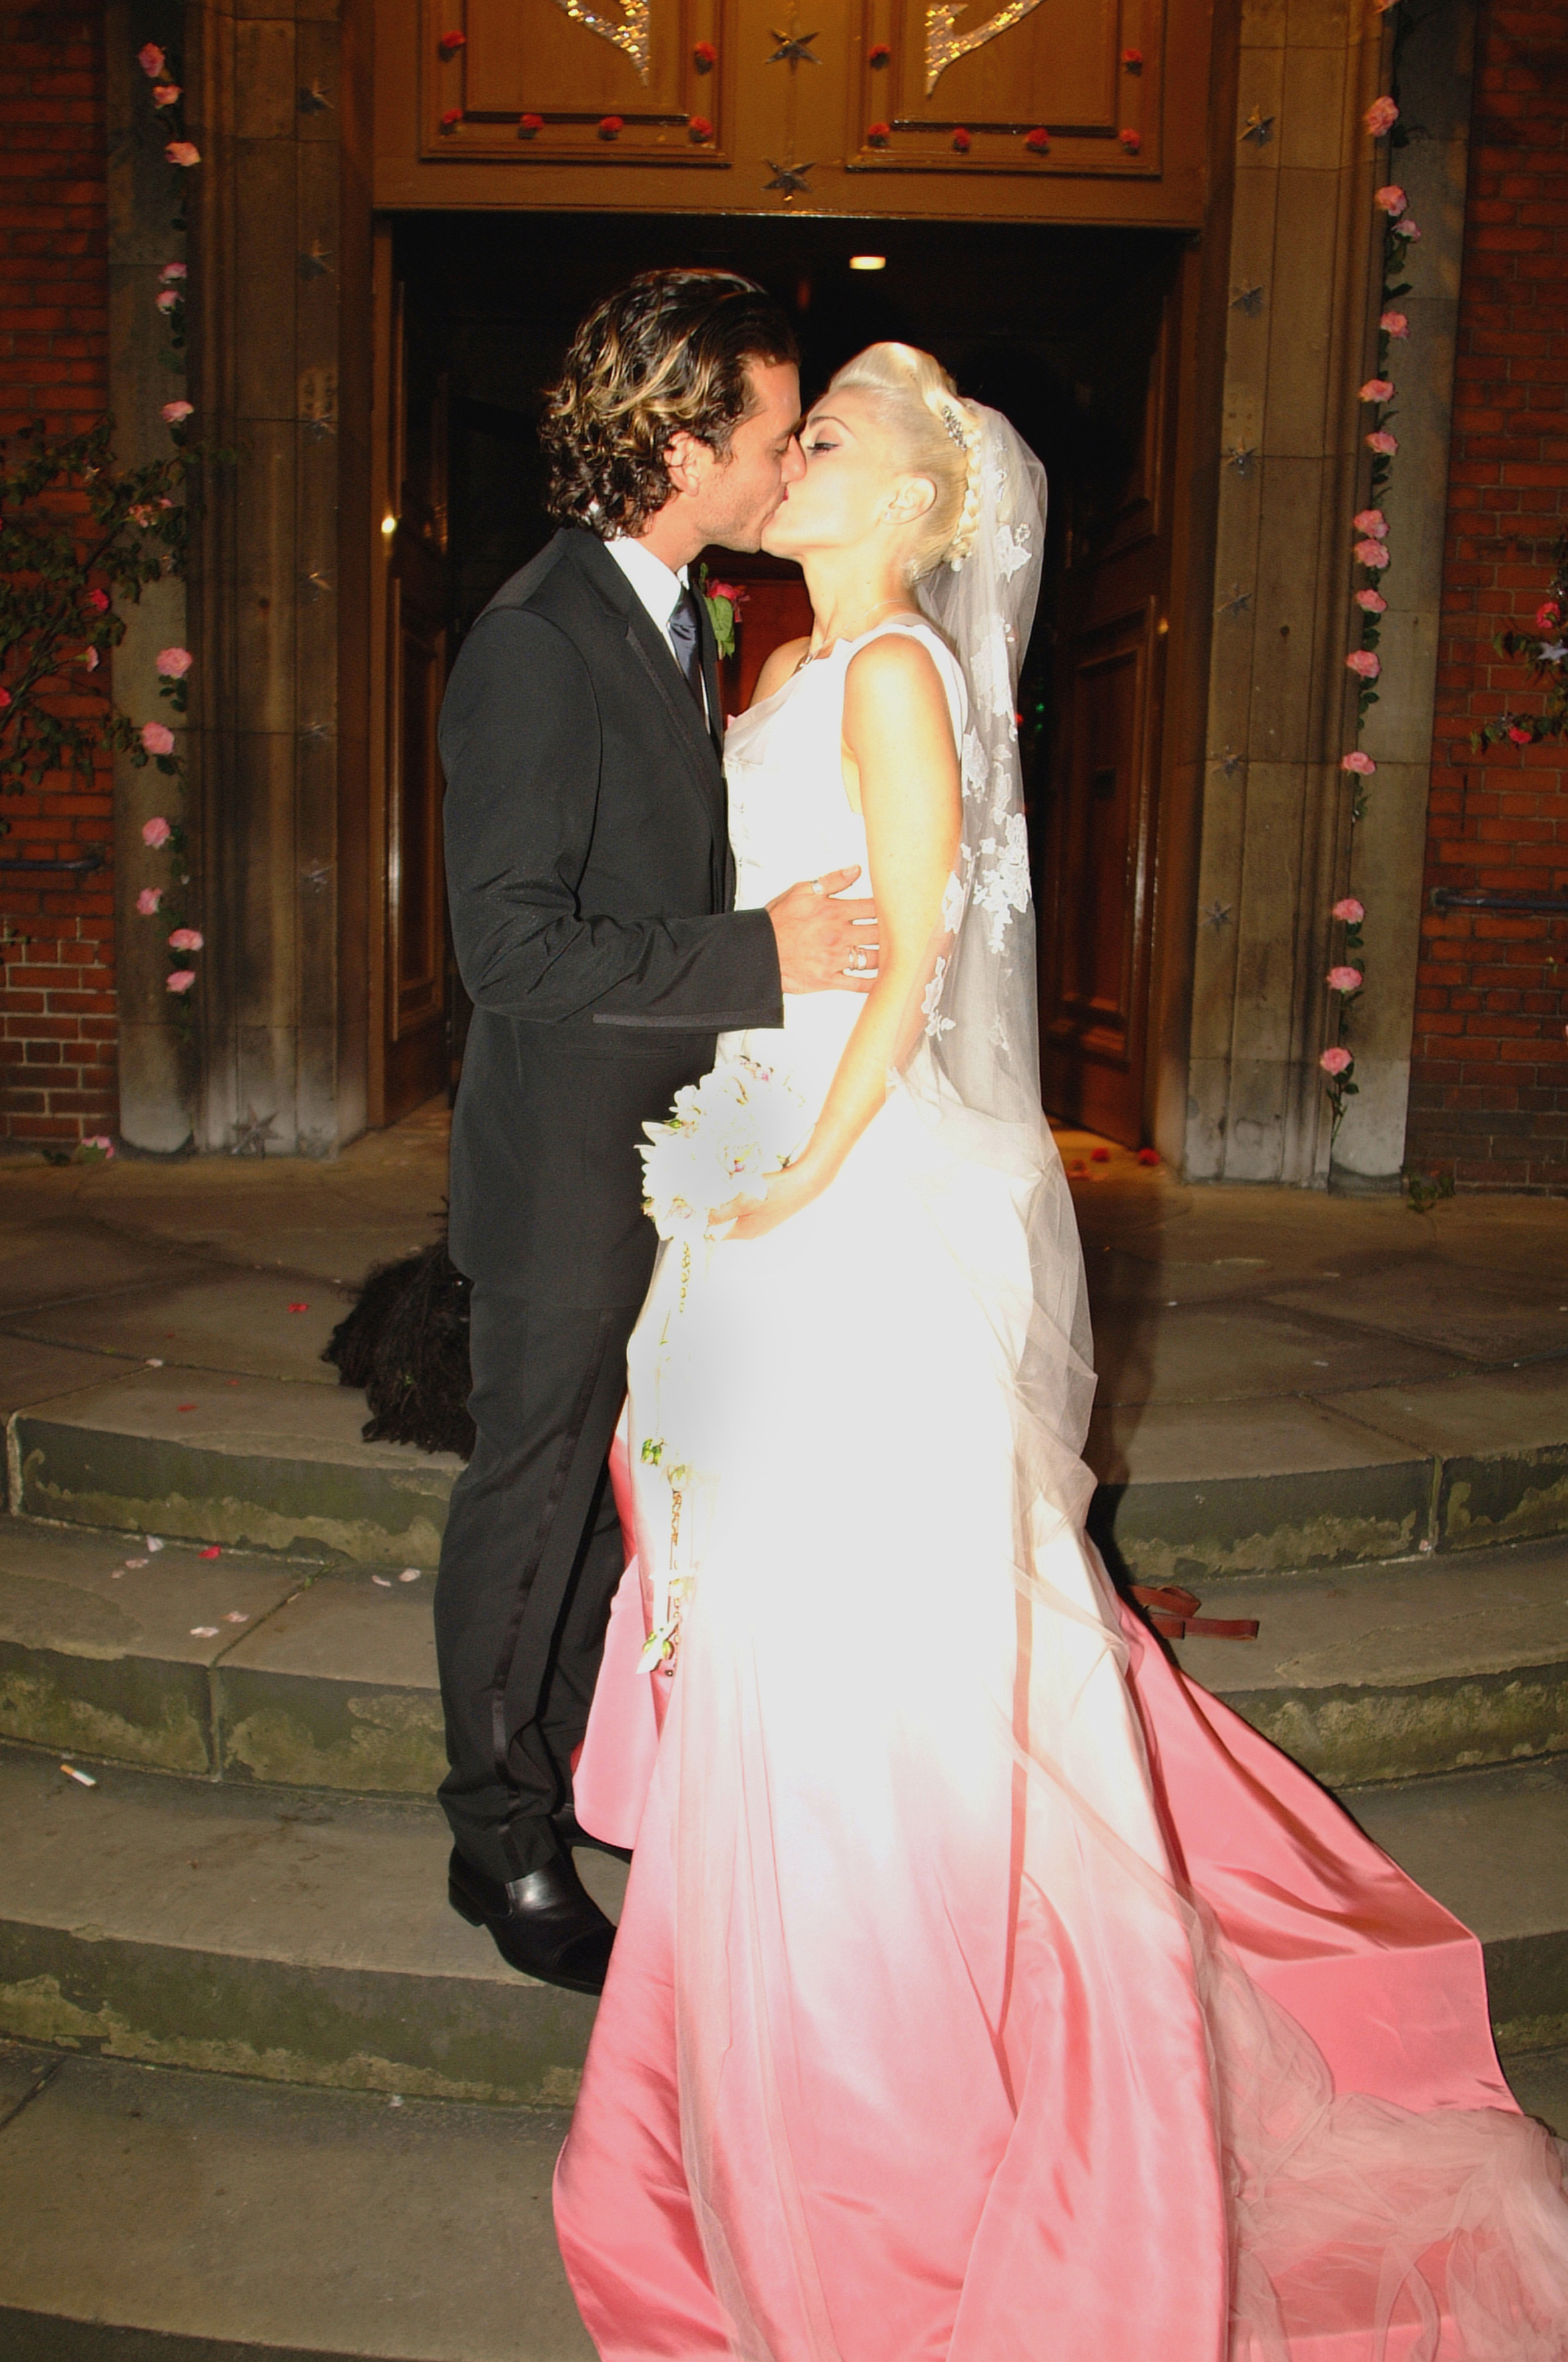 Gavin Rossdale tied the knot with Gwen Stefani at St. Paul's Cathedral in Covent Garden, London, on September 14, 2002. | Source: Getty Images